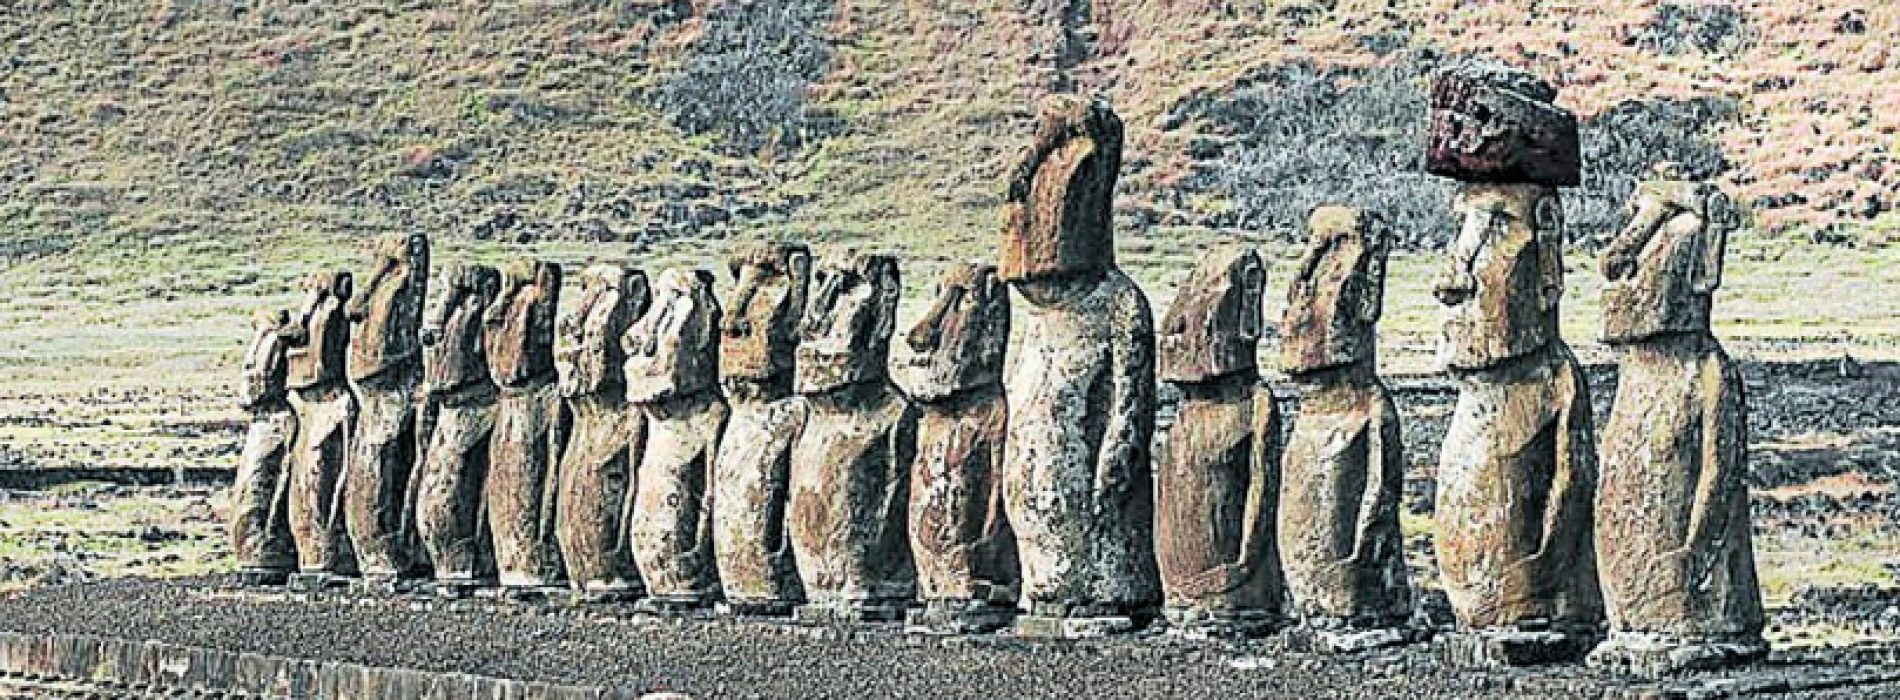 They seek to decipher the genetics of extinct tree of Easter Island